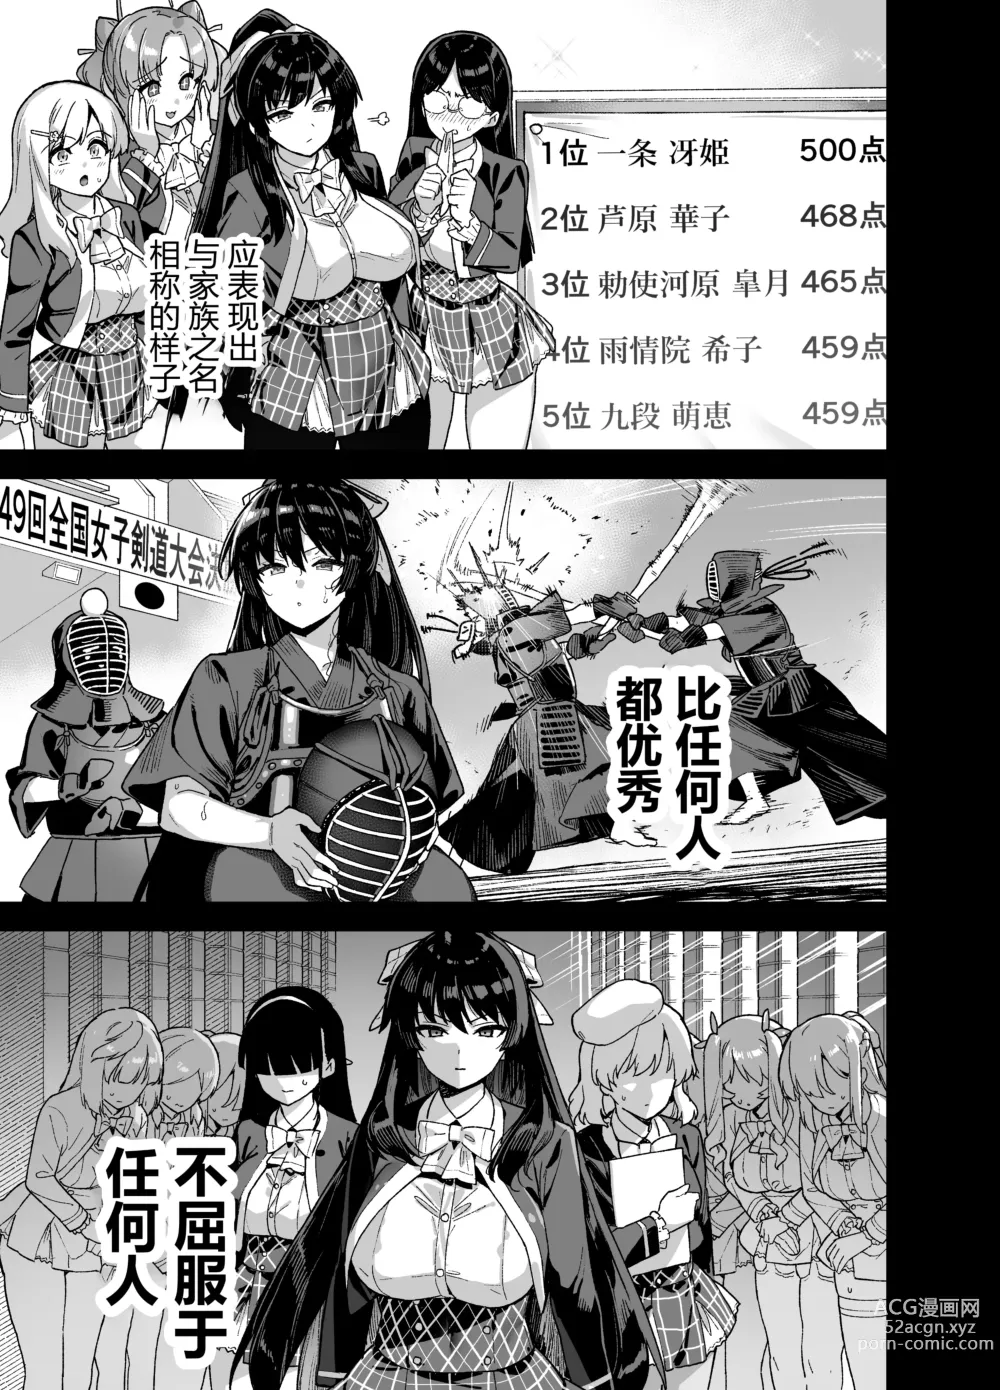 Page 22 of doujinshi 桜春女学院の男優 1-2